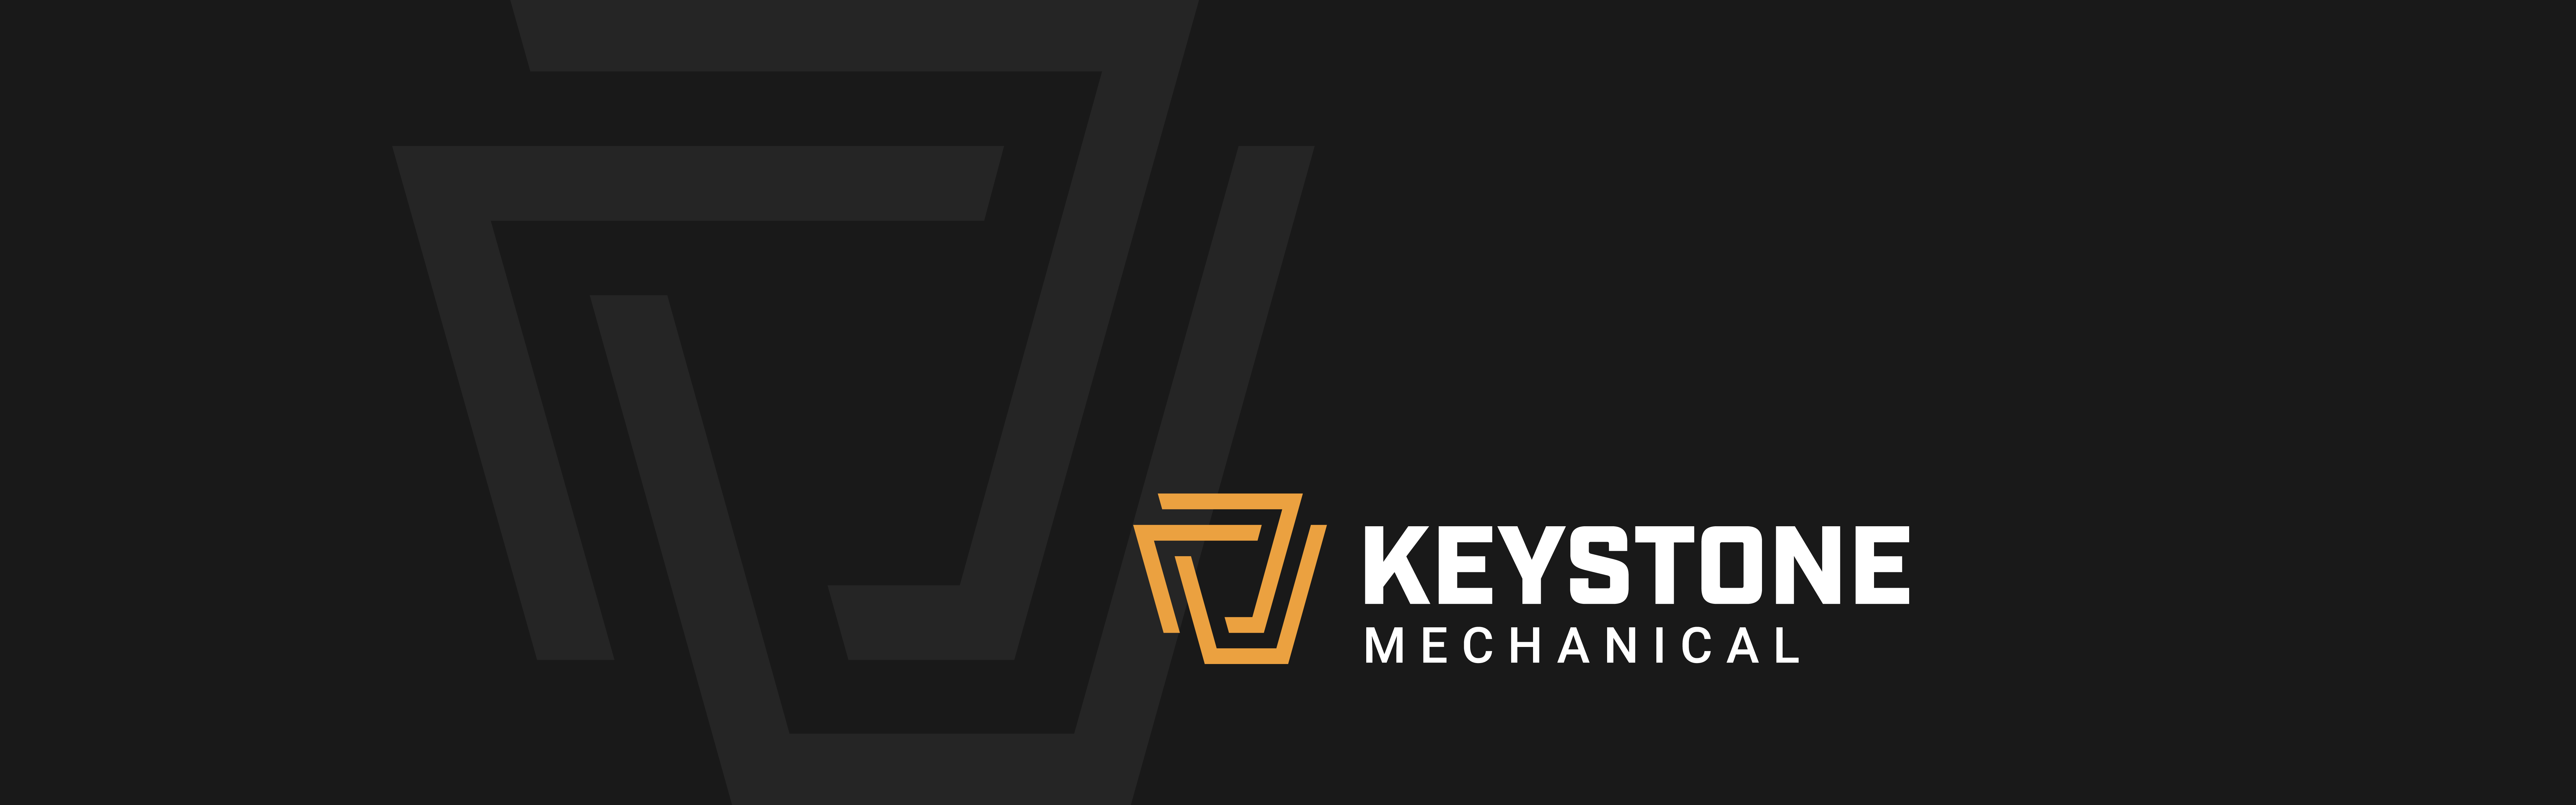 Logo of Keystone Mechanical featuring stylized letters "K" and "M" with a geometric design on a black background.